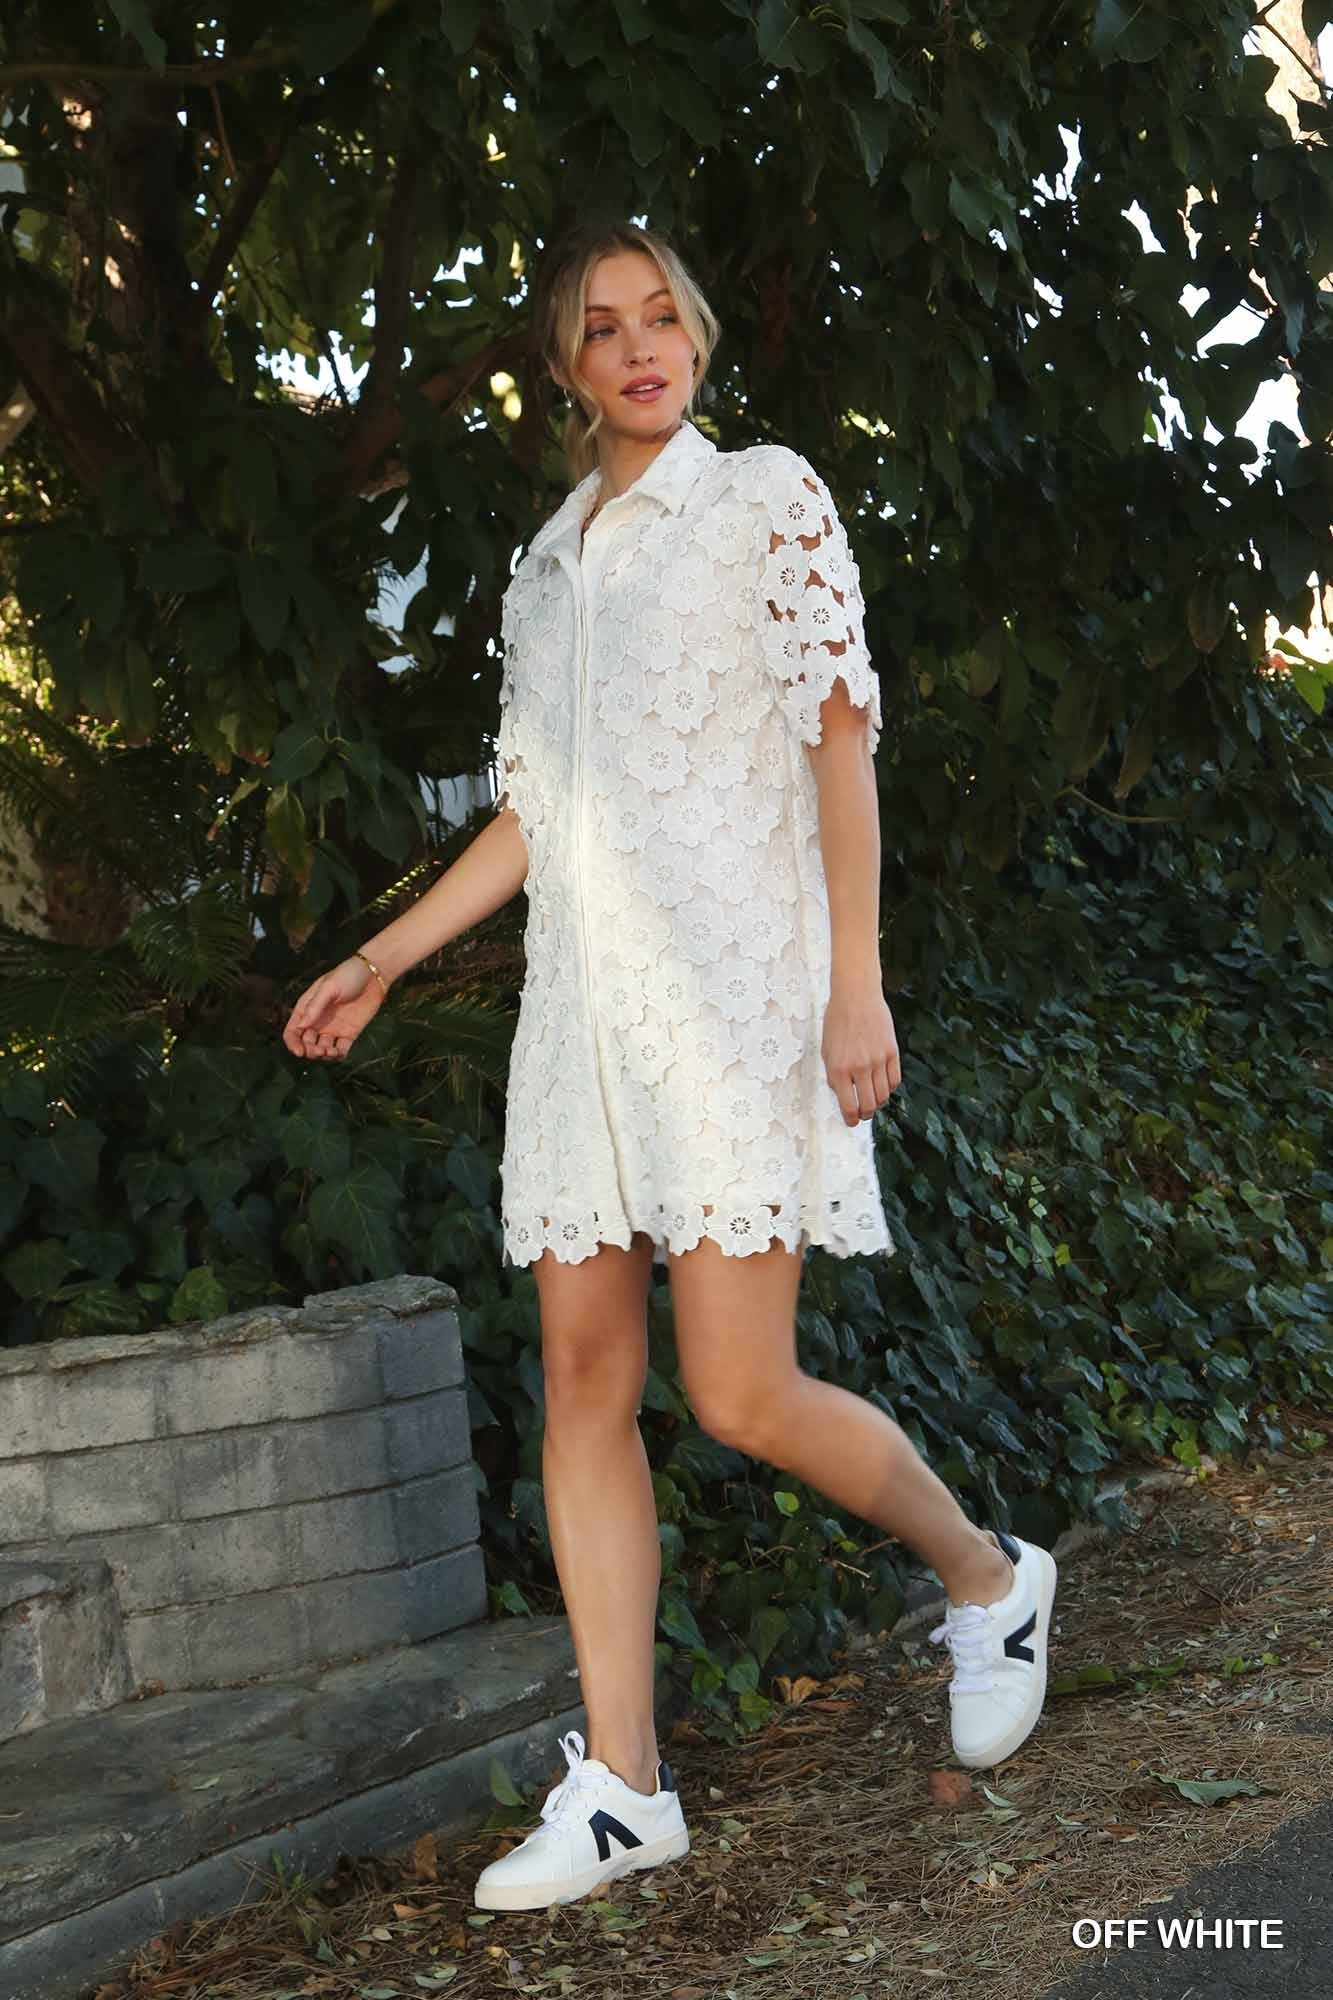 Get ready to bloom with the Flower Power Dress! This playful dress features a charming floral lace design and a button down front, perfect for a fun and flirty look. Embrace your inner flower child and stand out in this quirky and stylish dress.